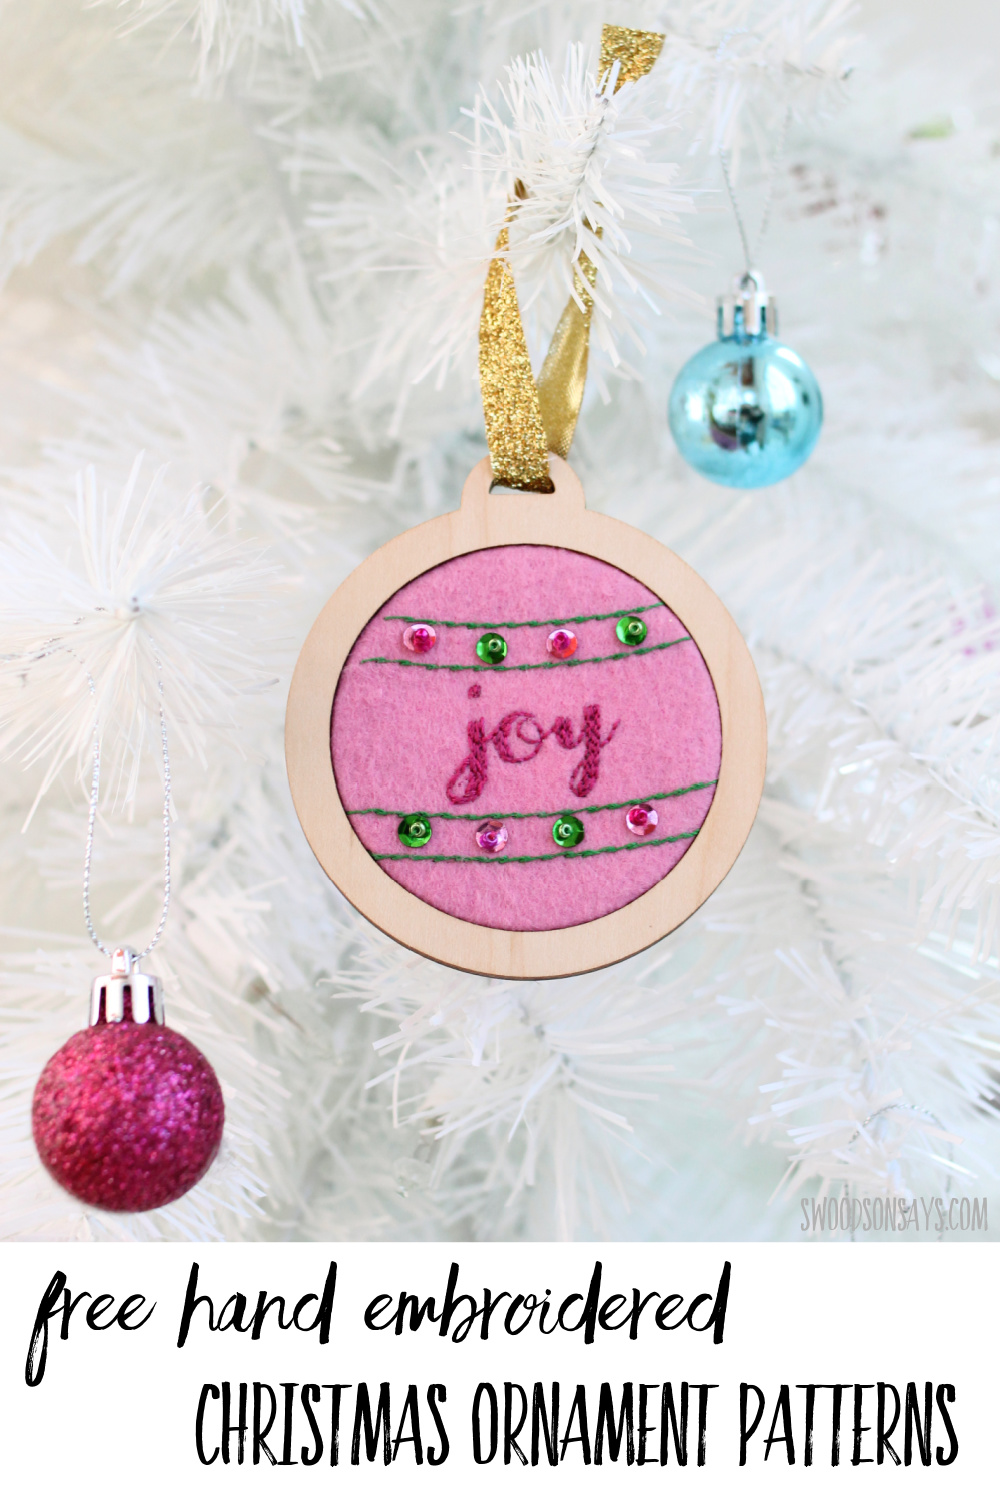 Free hand embroidered christmas ornaments patterns pdf download